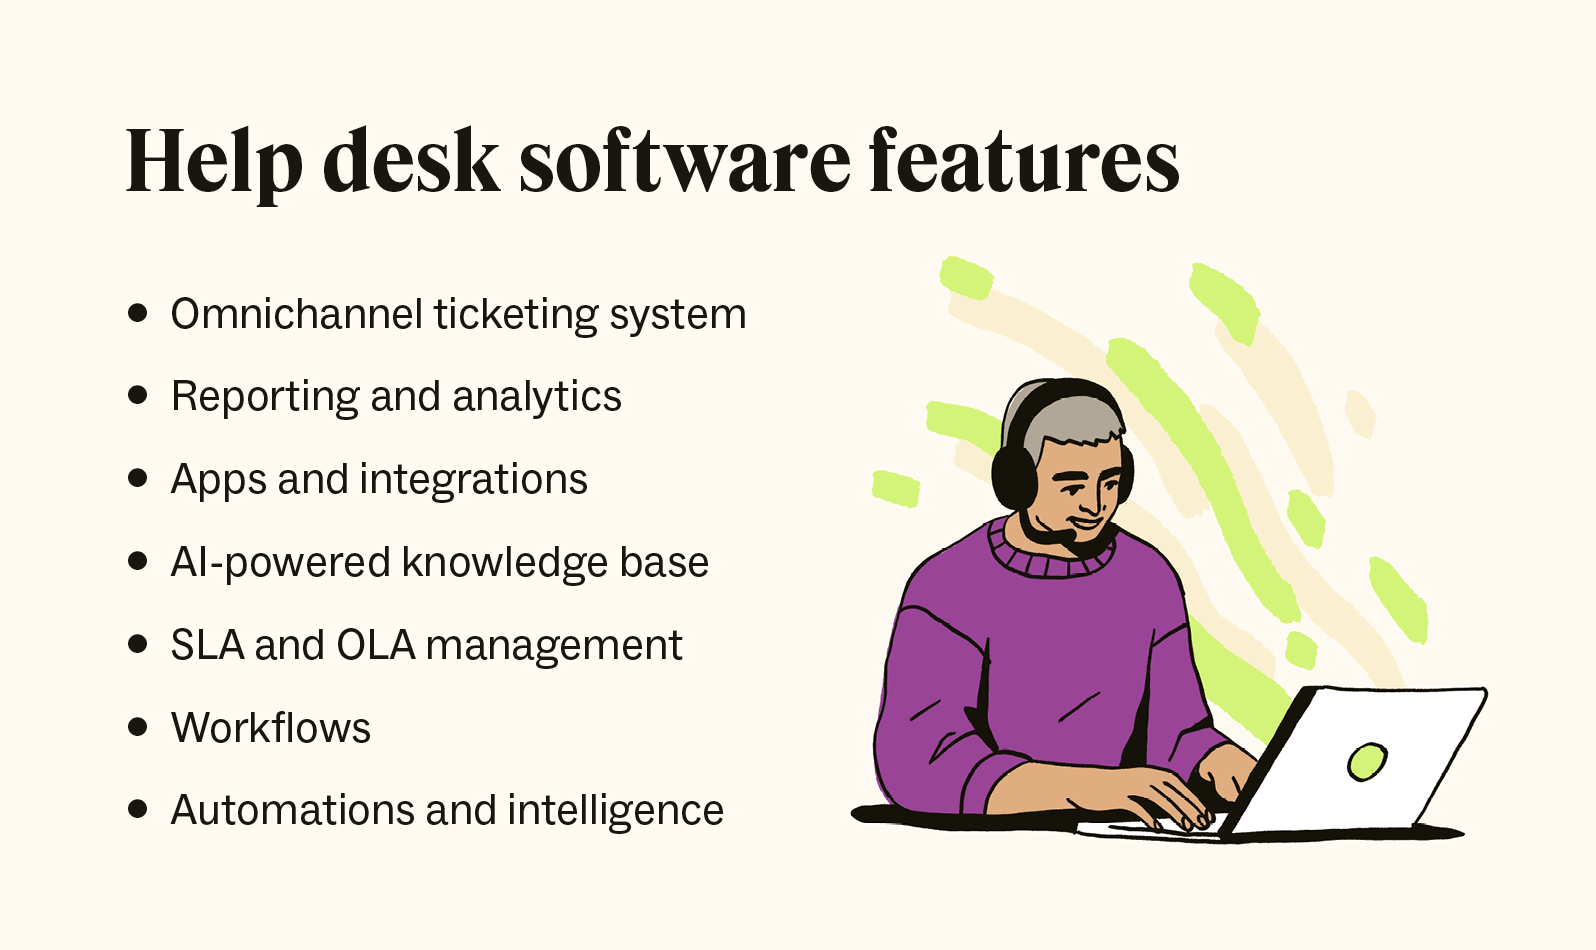 An illustration shows an agent using a laptop next to a list of key help desk software features.